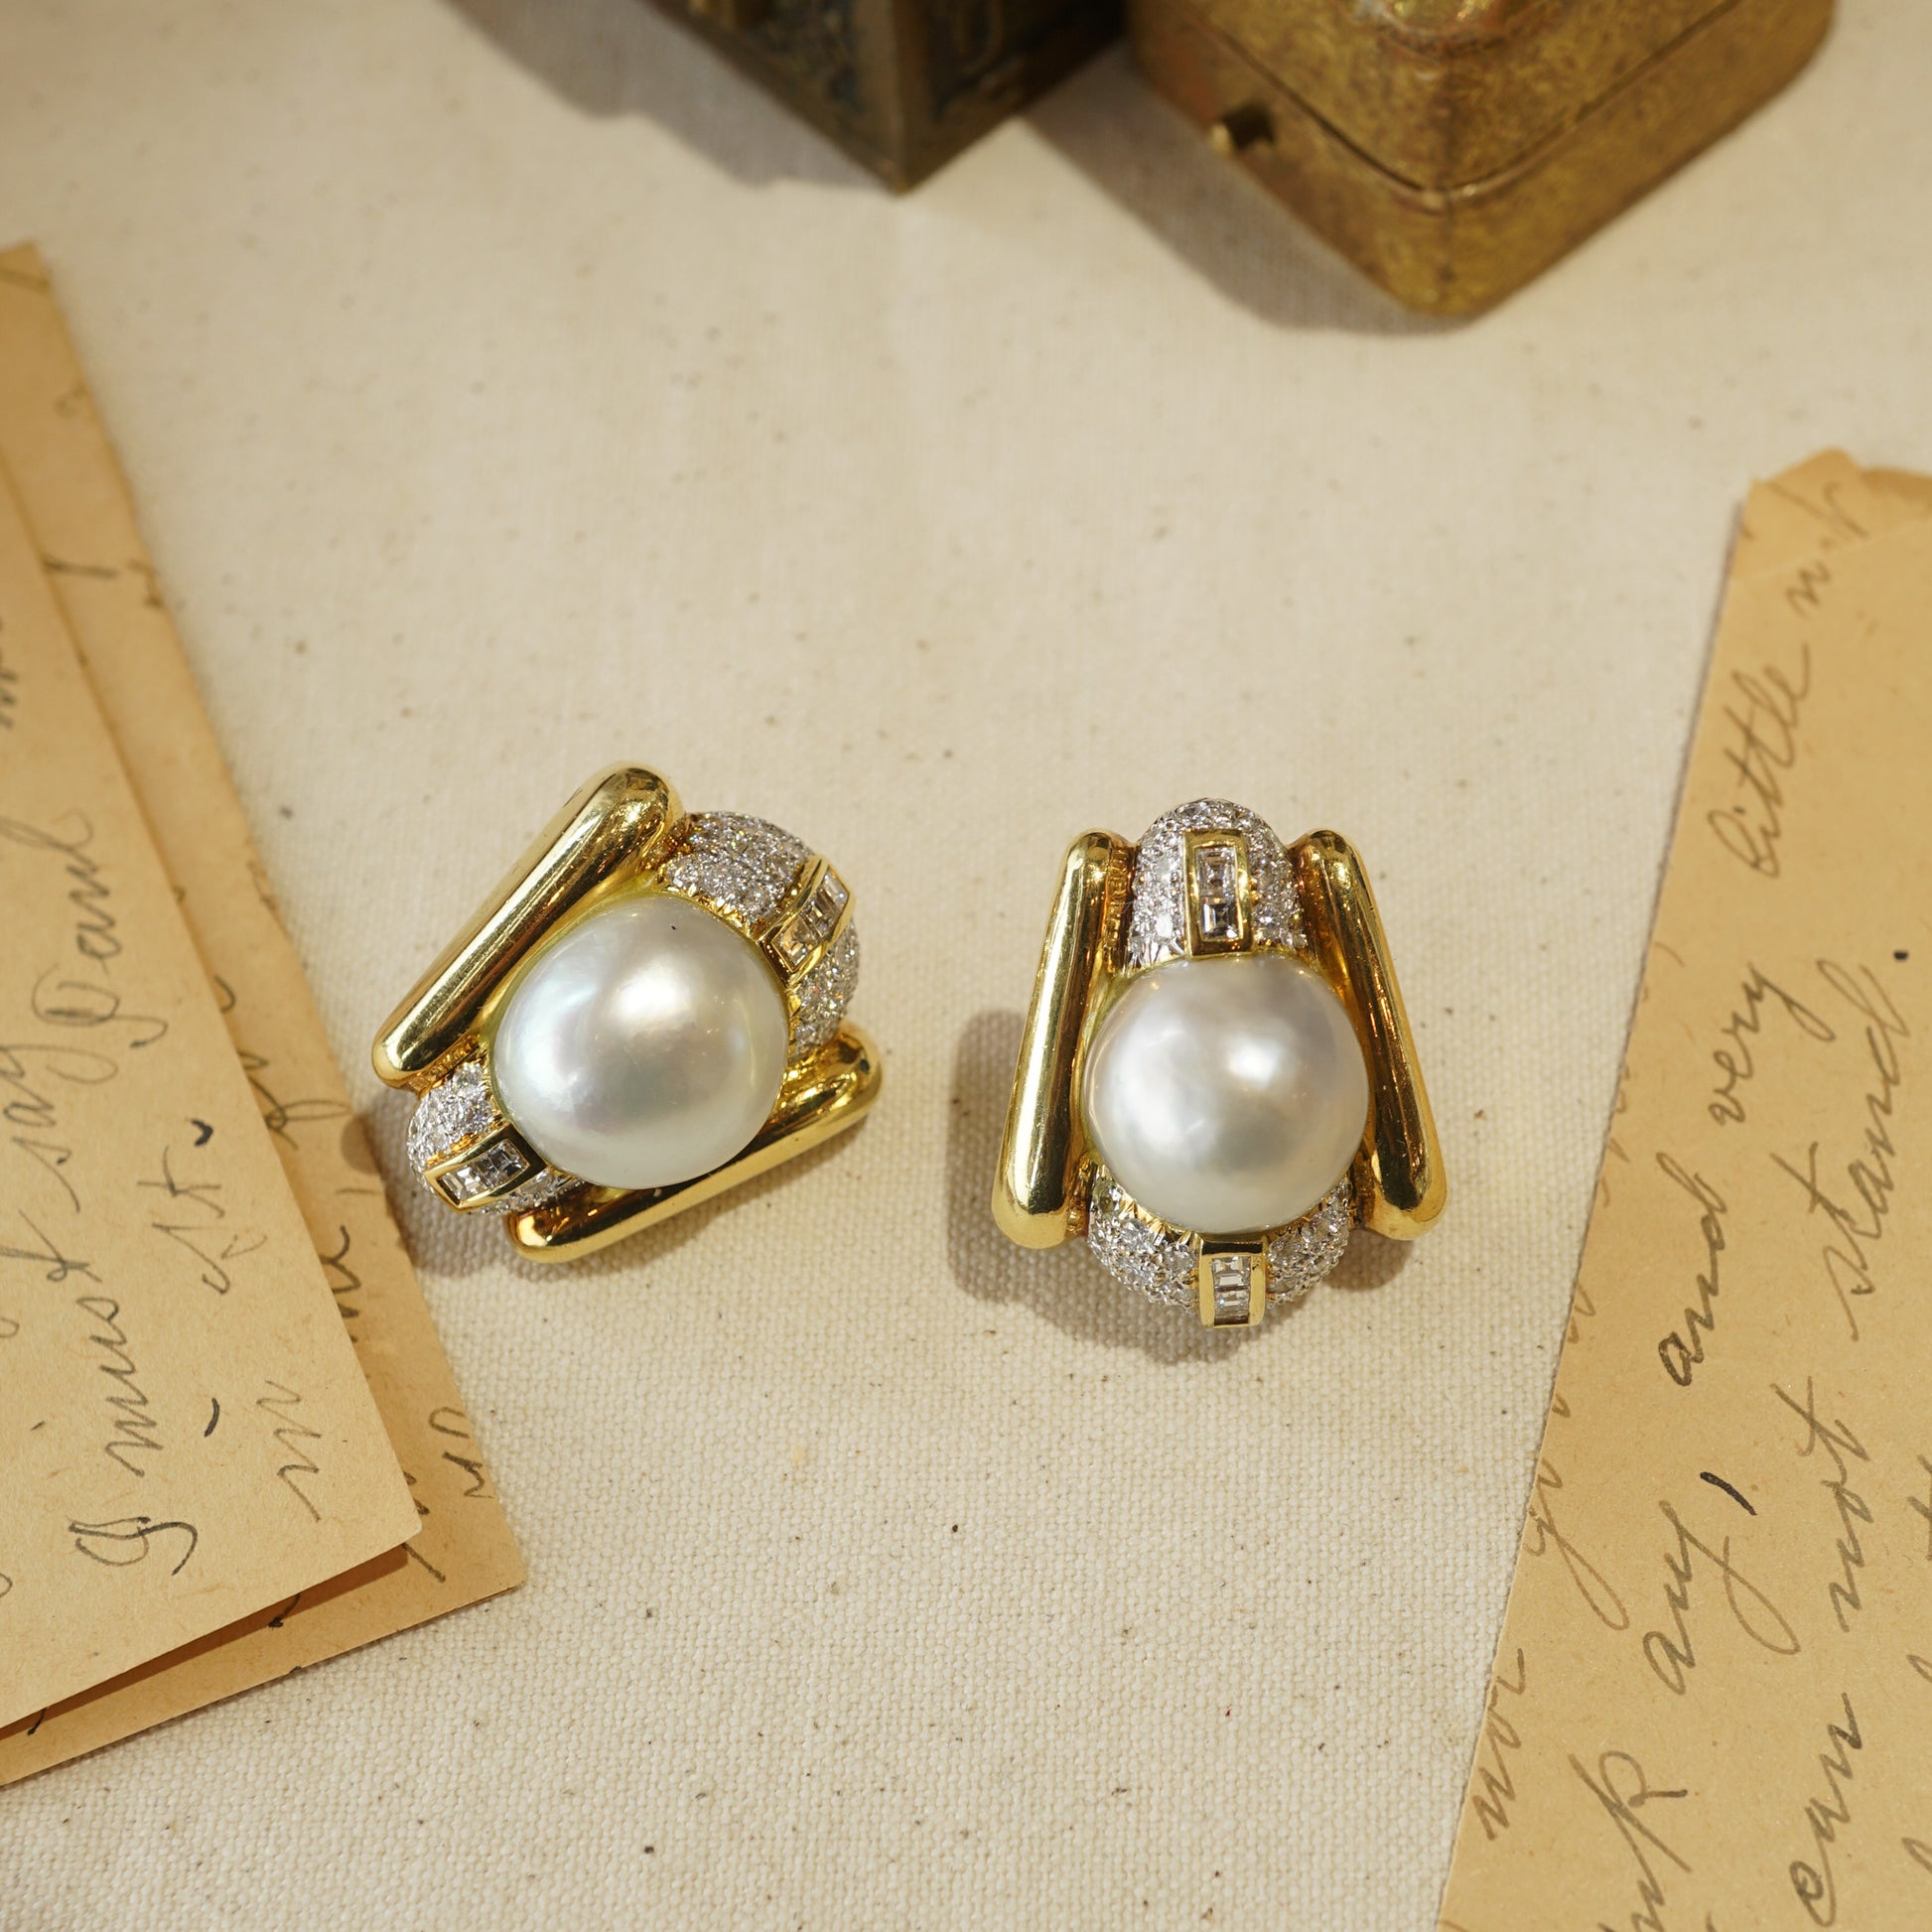 Mid Century Pearl & Diamond Earrings in 18k Yellow GoldComposition: 18 Karat Yellow Gold Total Diamond Weight: 3.68ct Total Gram Weight: 42.1 g Inscription: 750
      